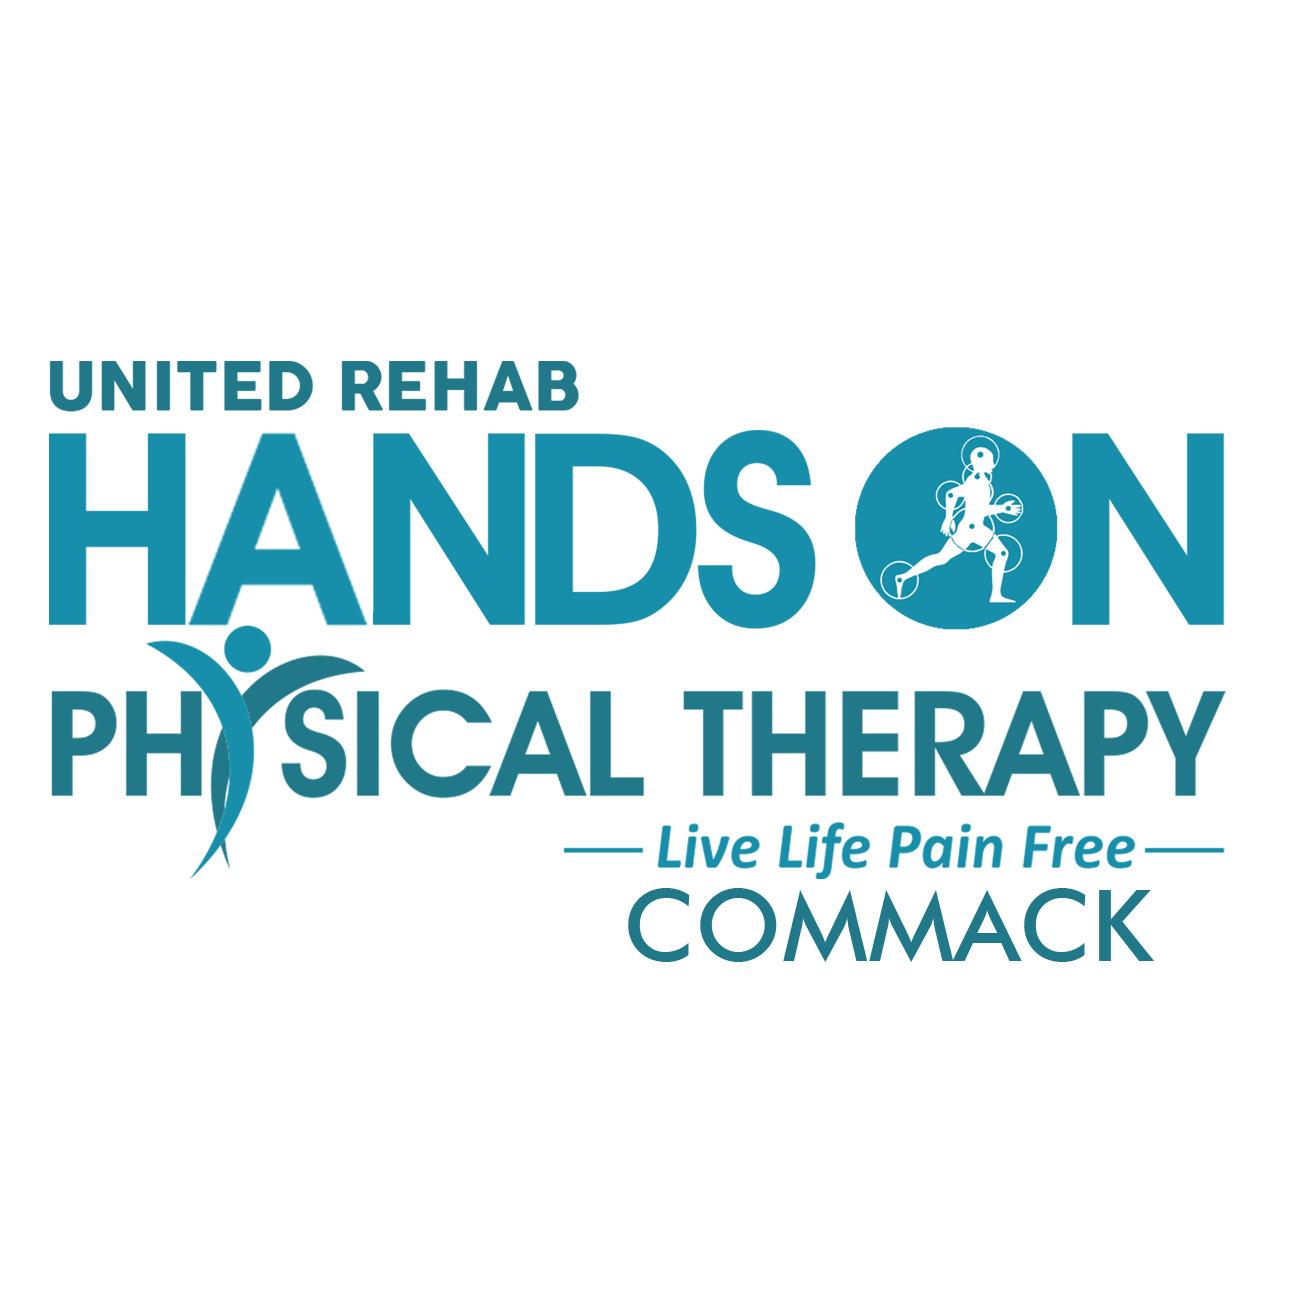 HANDS ON PHYSICAL THERAPY | COMMACK